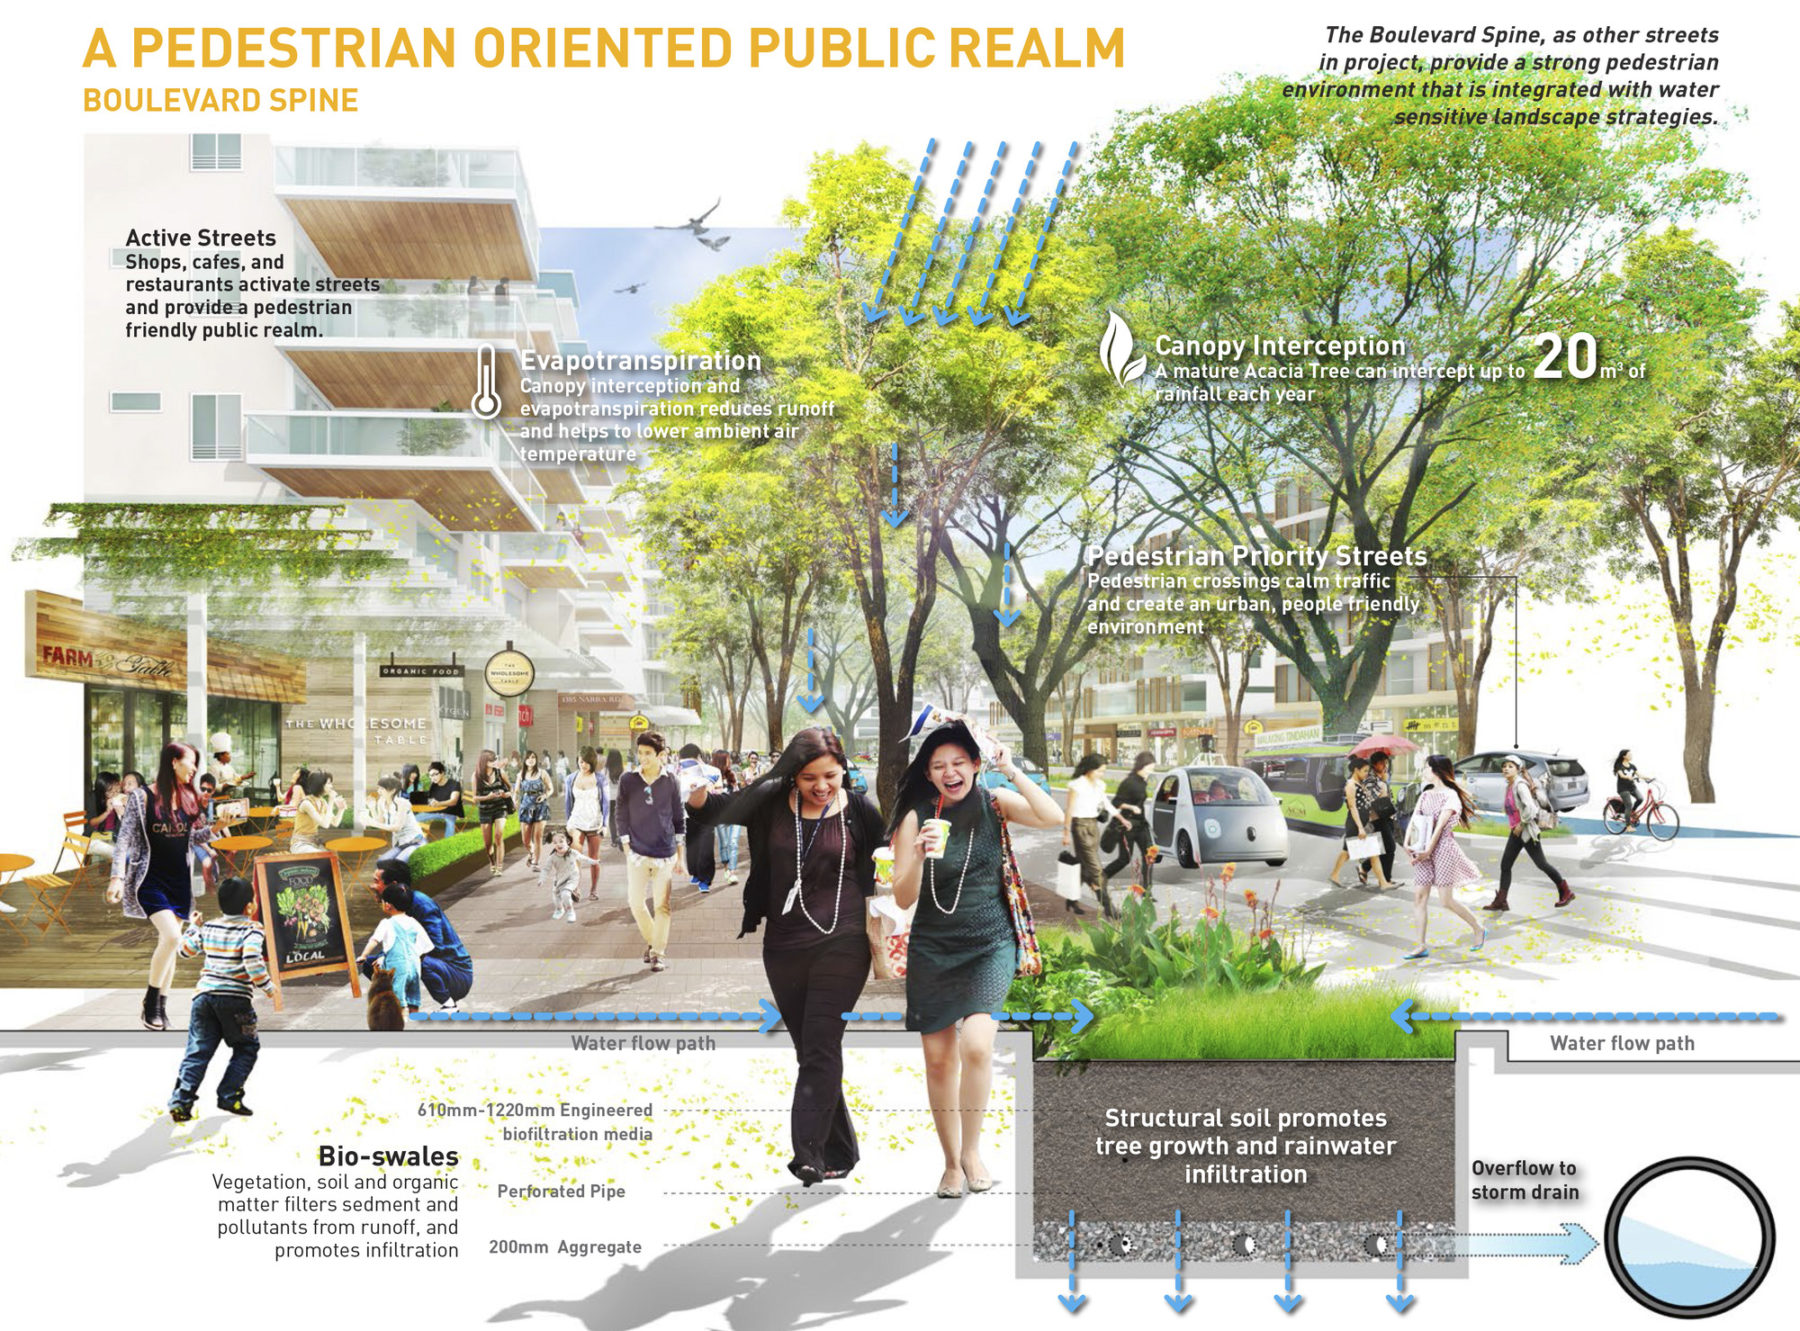 Graphic showing a pedestrian oriented public realm